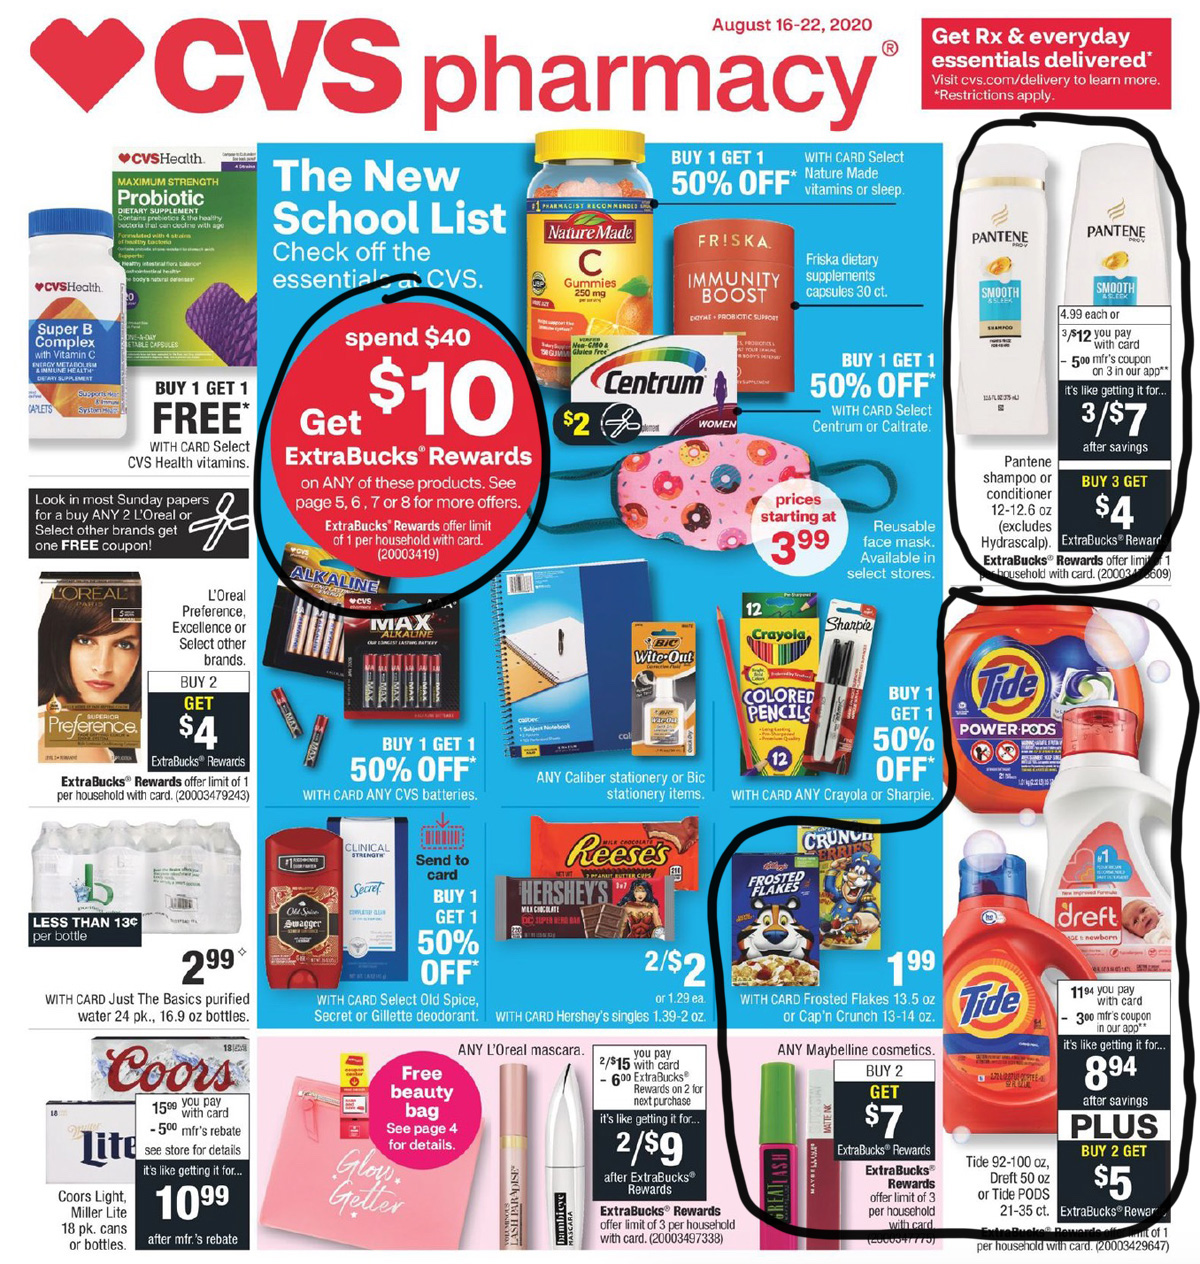 compare weekly ads